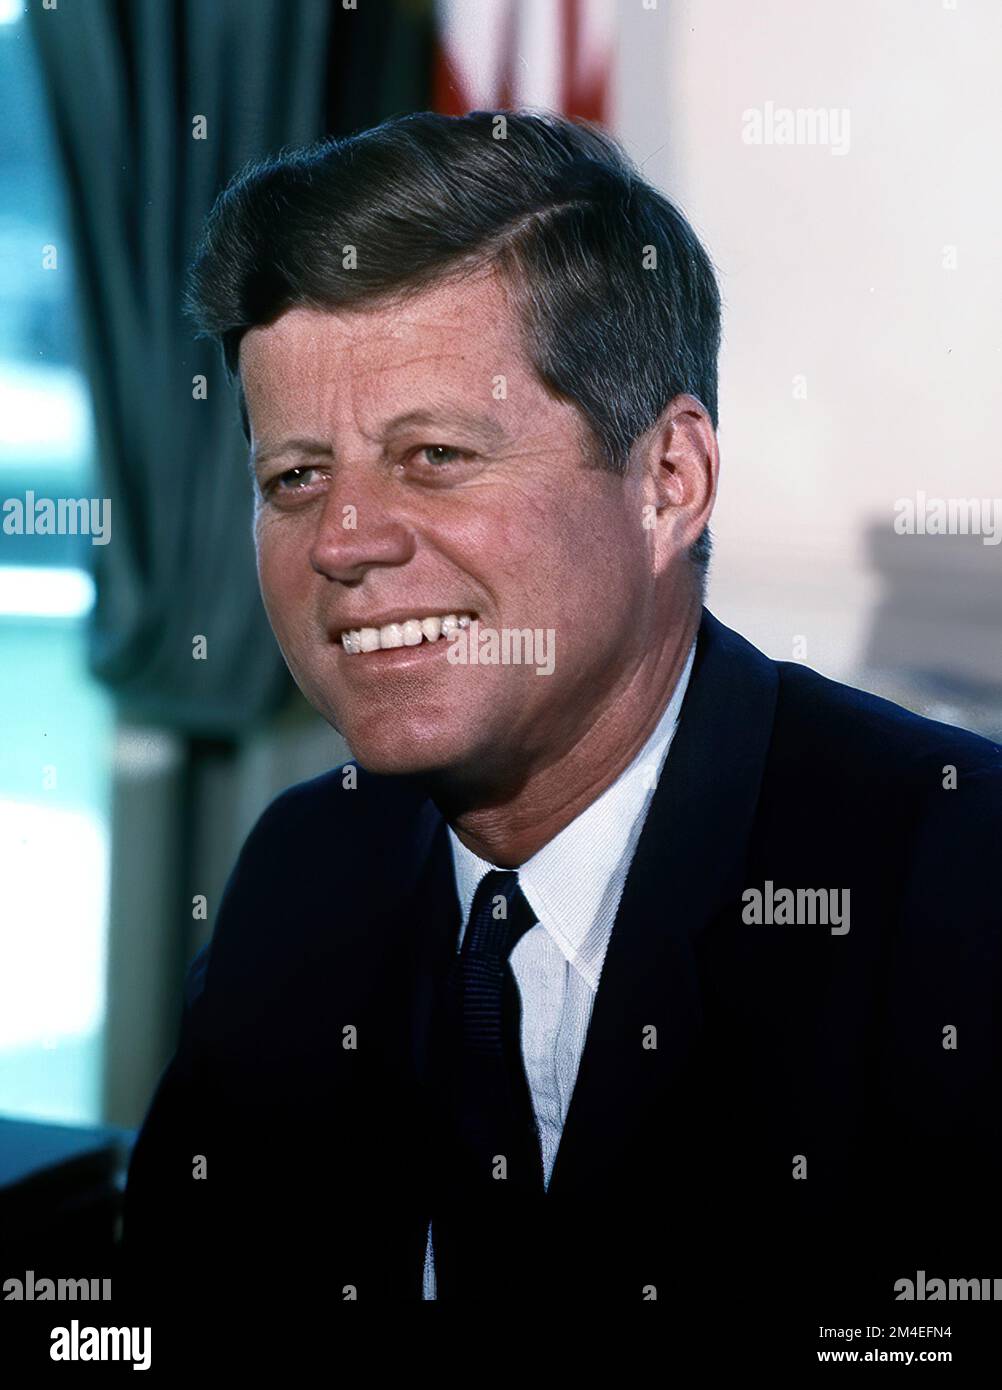 John F. Kennedy, photograph in the Oval Office. Stock Photo